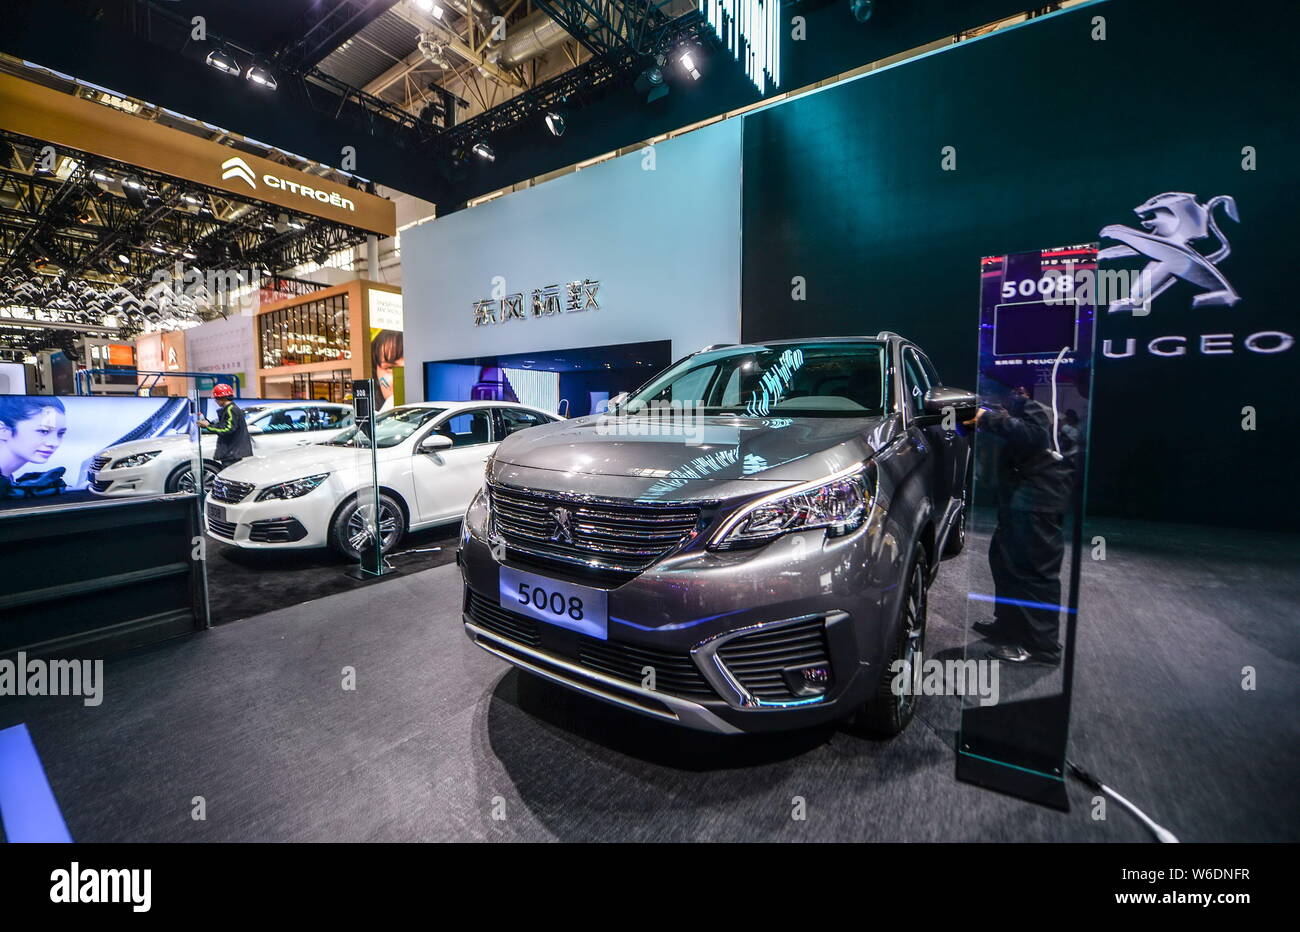 A Peugeot 5008 SUV and other Peugeot cars are on display during a preview of the 15th Beijing International Automotive Exhibition, also known as Auto Stock Photo